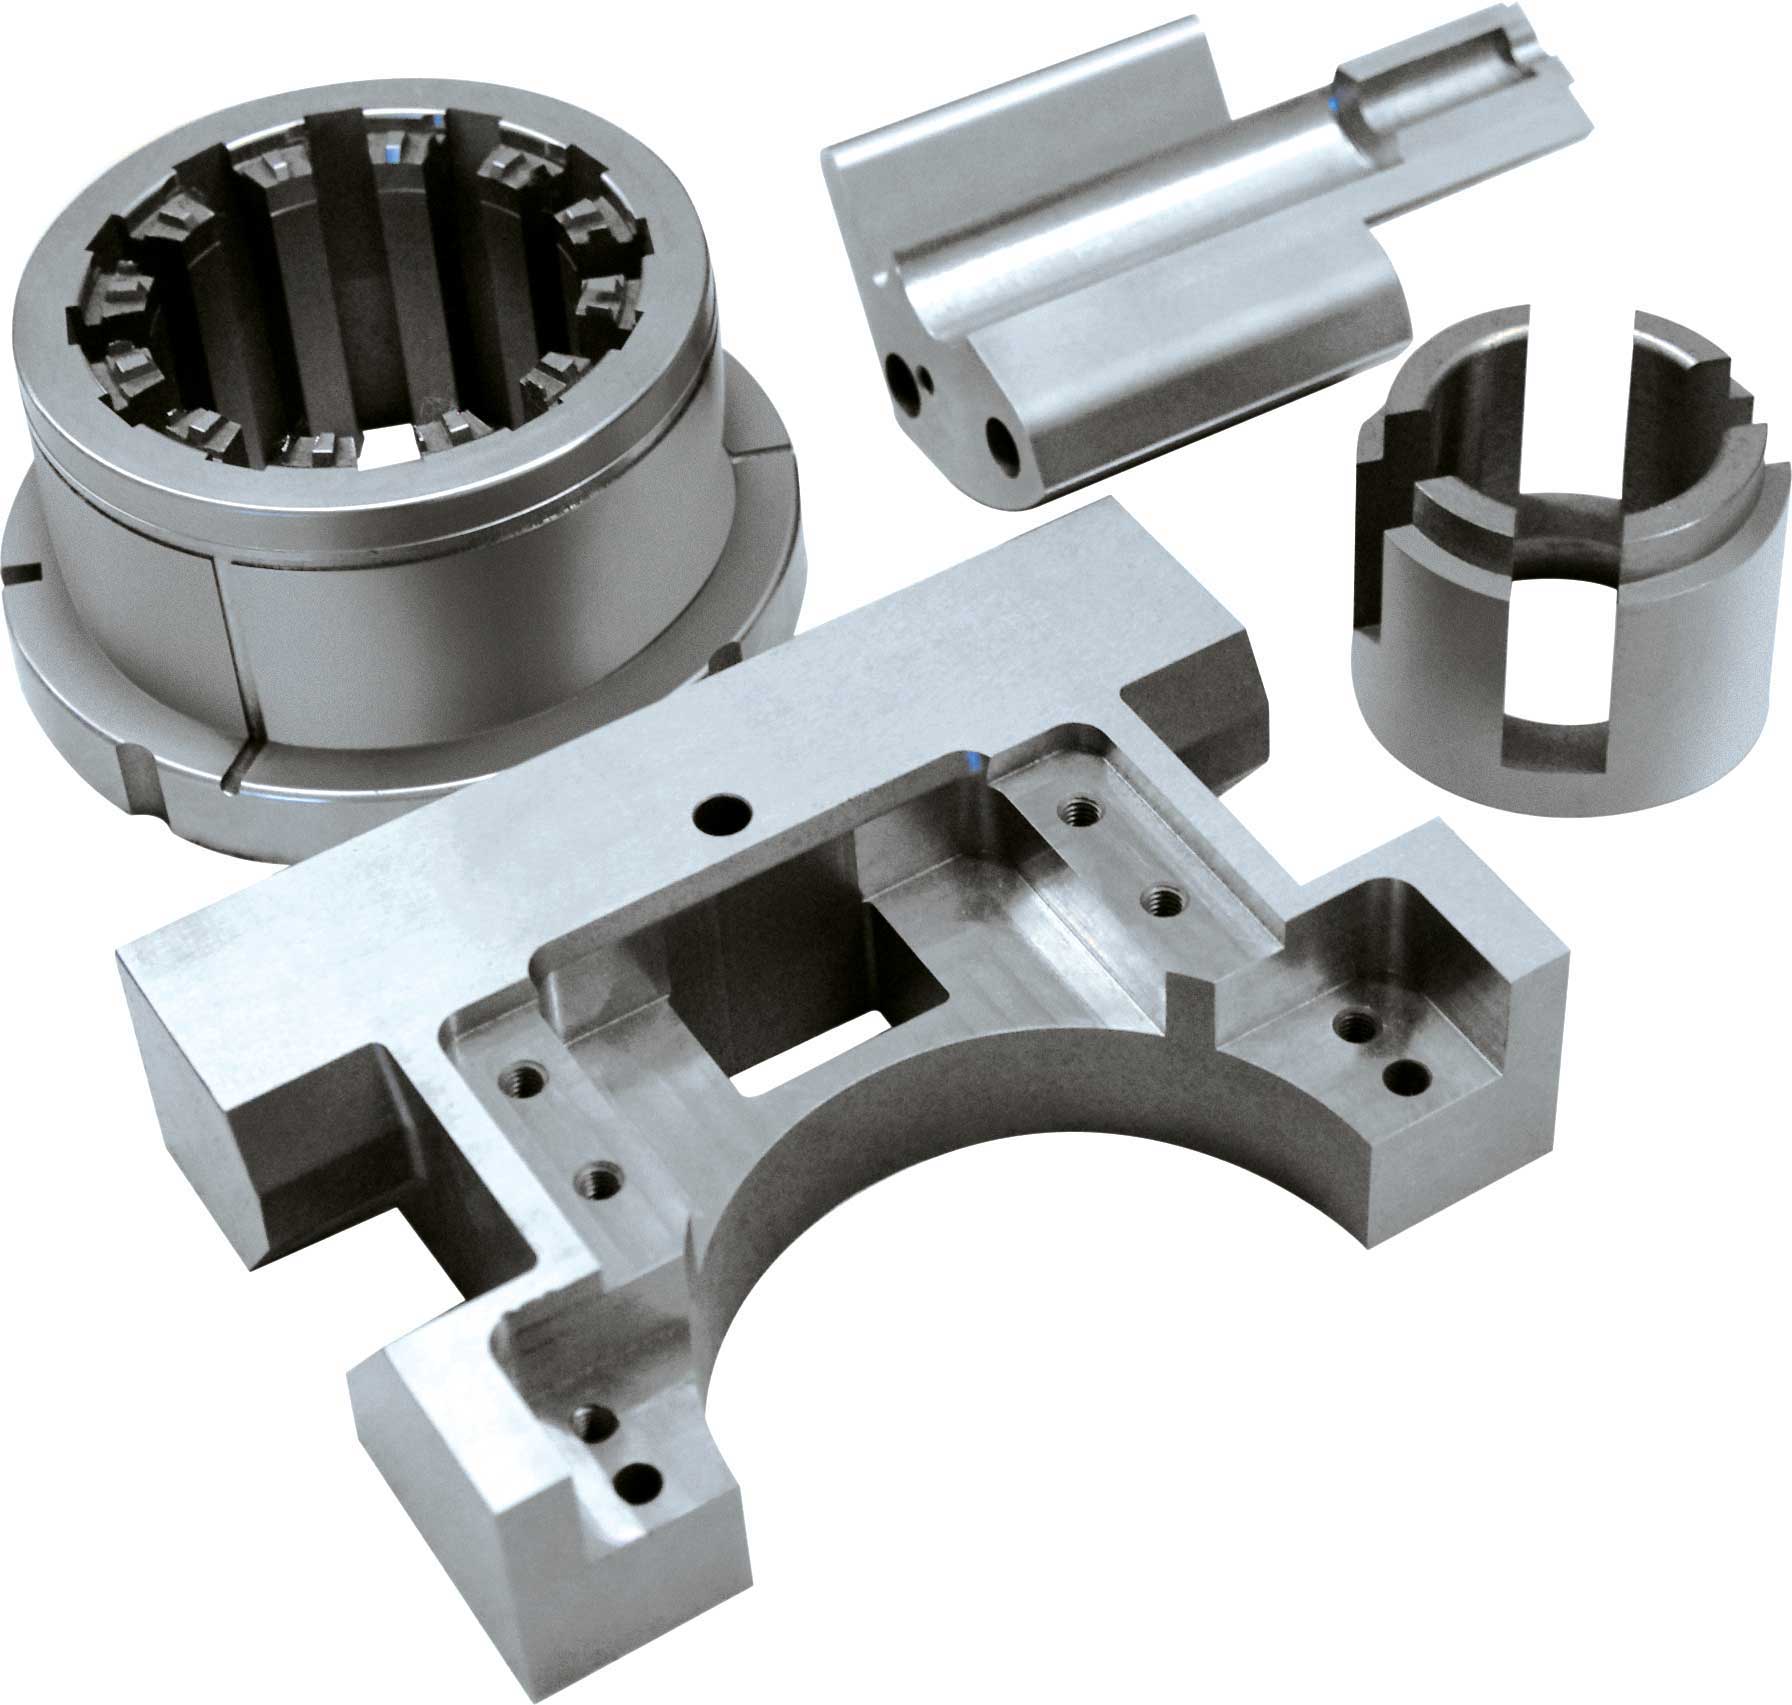 For single parts made of hardened steel containing penetrations with edges, deep grooves and internal gearing, wire-cutting proves to be dependable, precise and – as a result of machining during unsupervised night and weekend shifts – highly cost-effective.